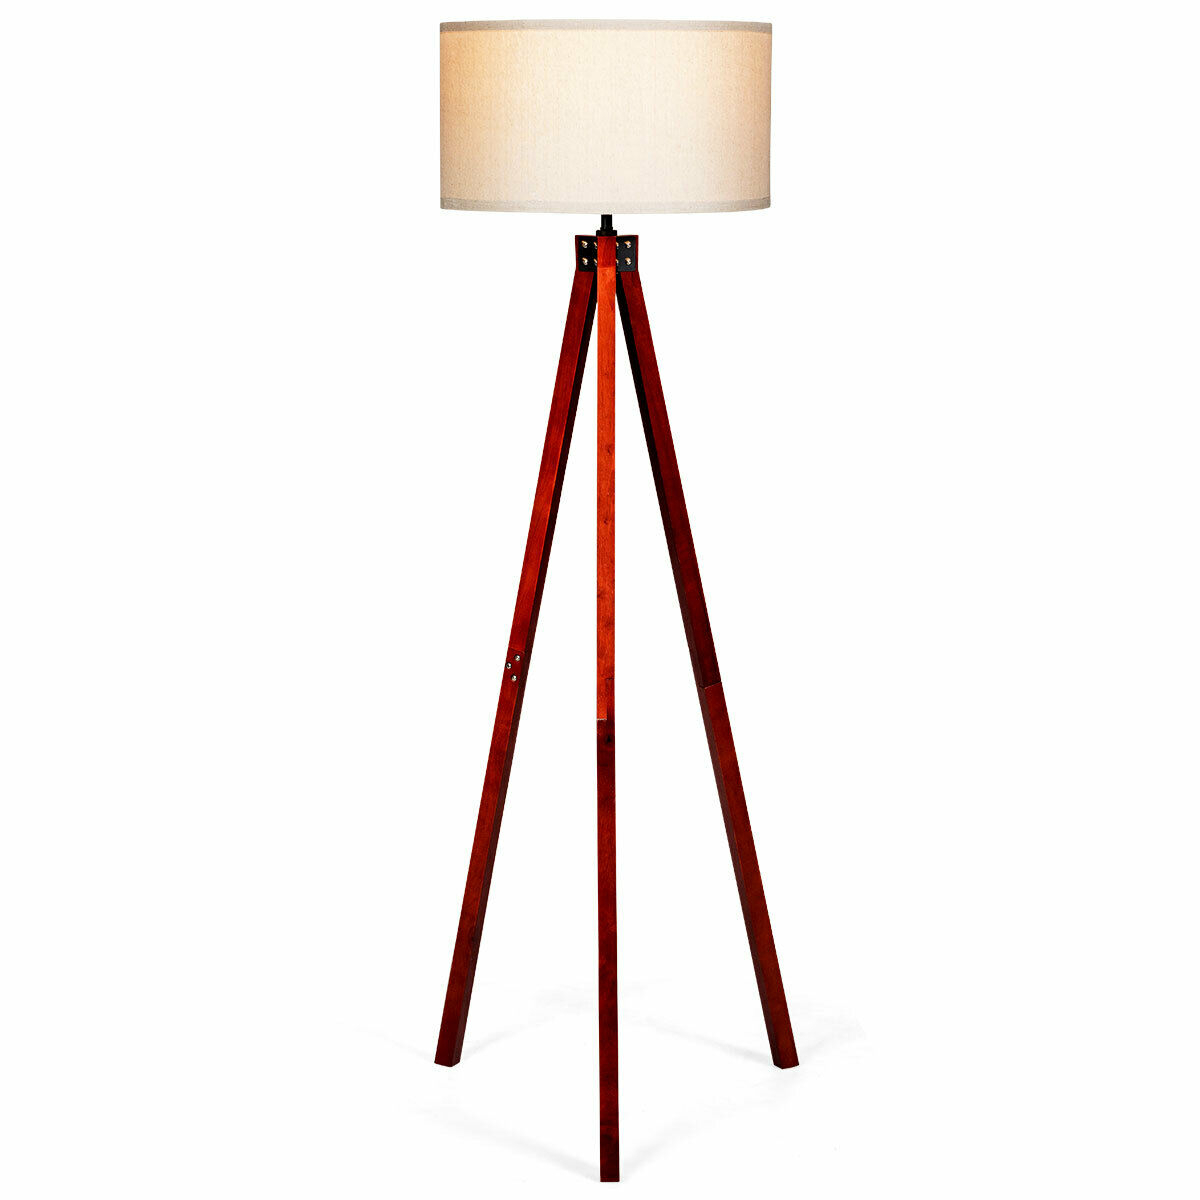 Modern Wood Tripod Floor Lamp W Foot Switch within dimensions 1200 X 1200